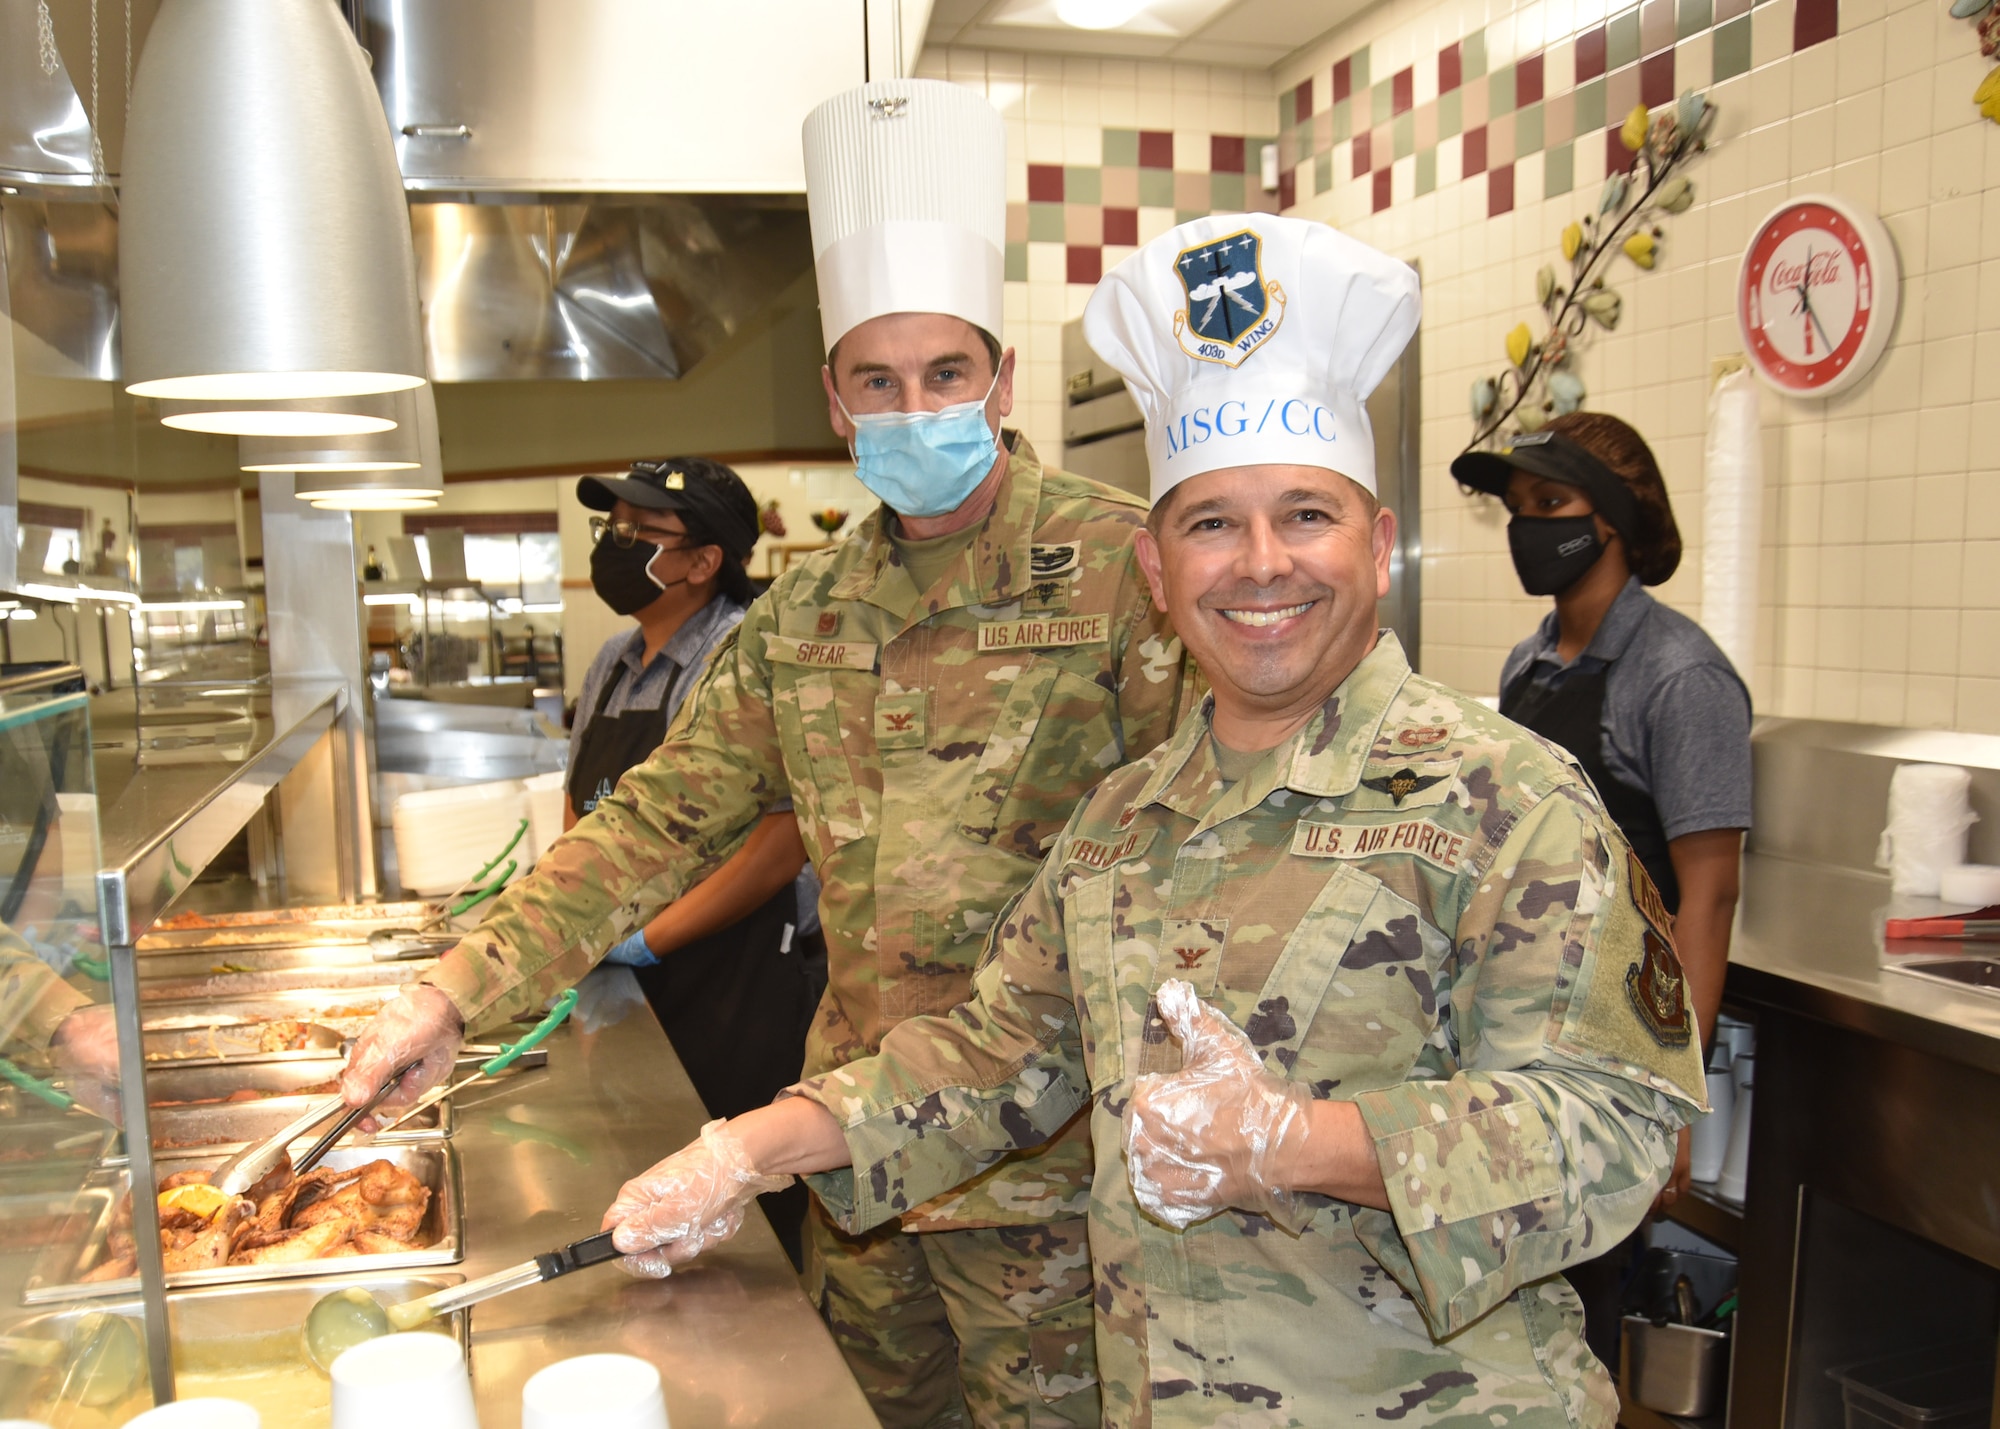 Col. Carl H. Spear Jr., (left)  and Col. Reginald G. Trujillo Jr. (right) stand together at the serving line.